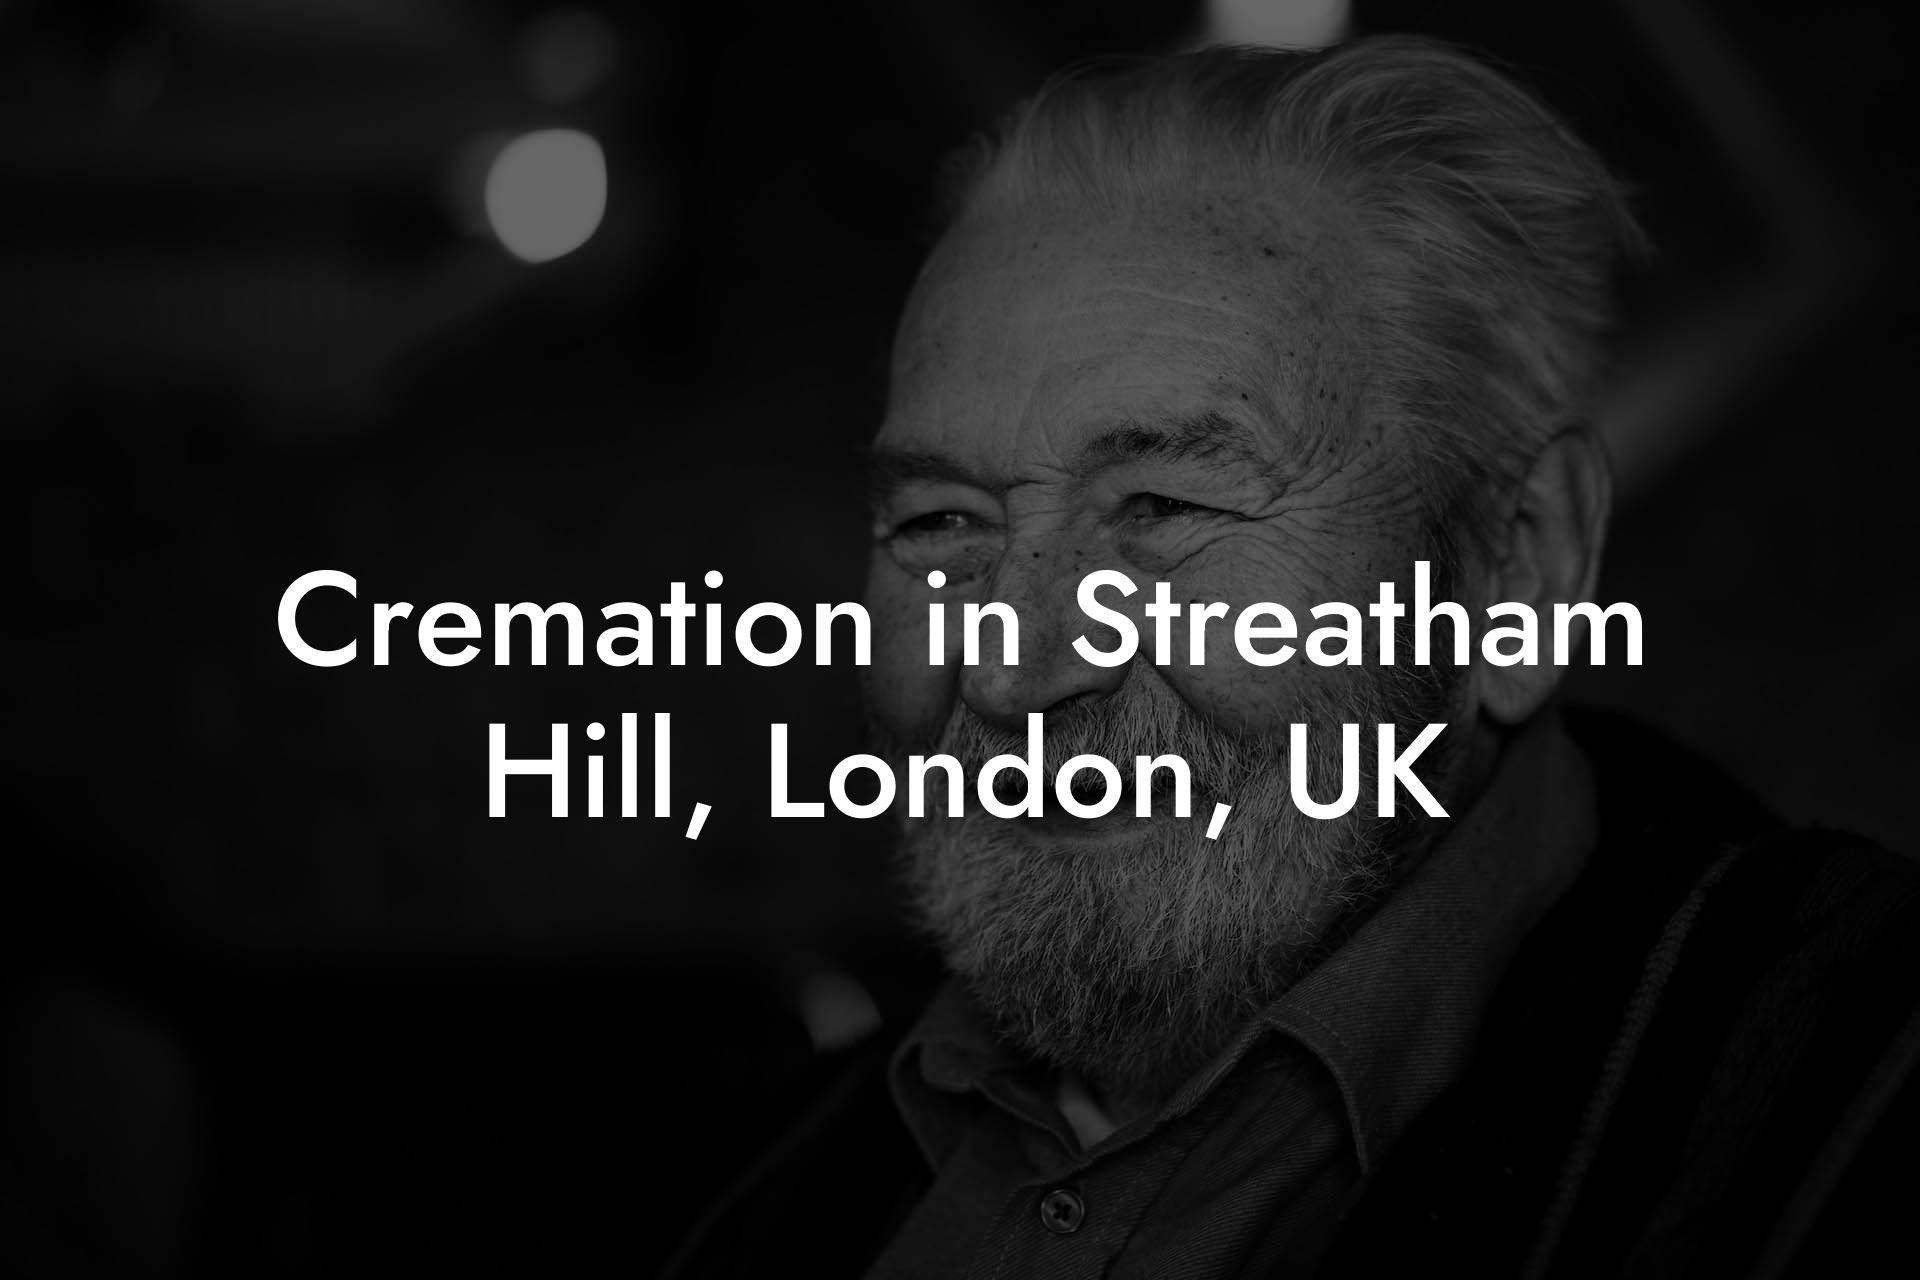 Cremation in Streatham Hill, London, UK